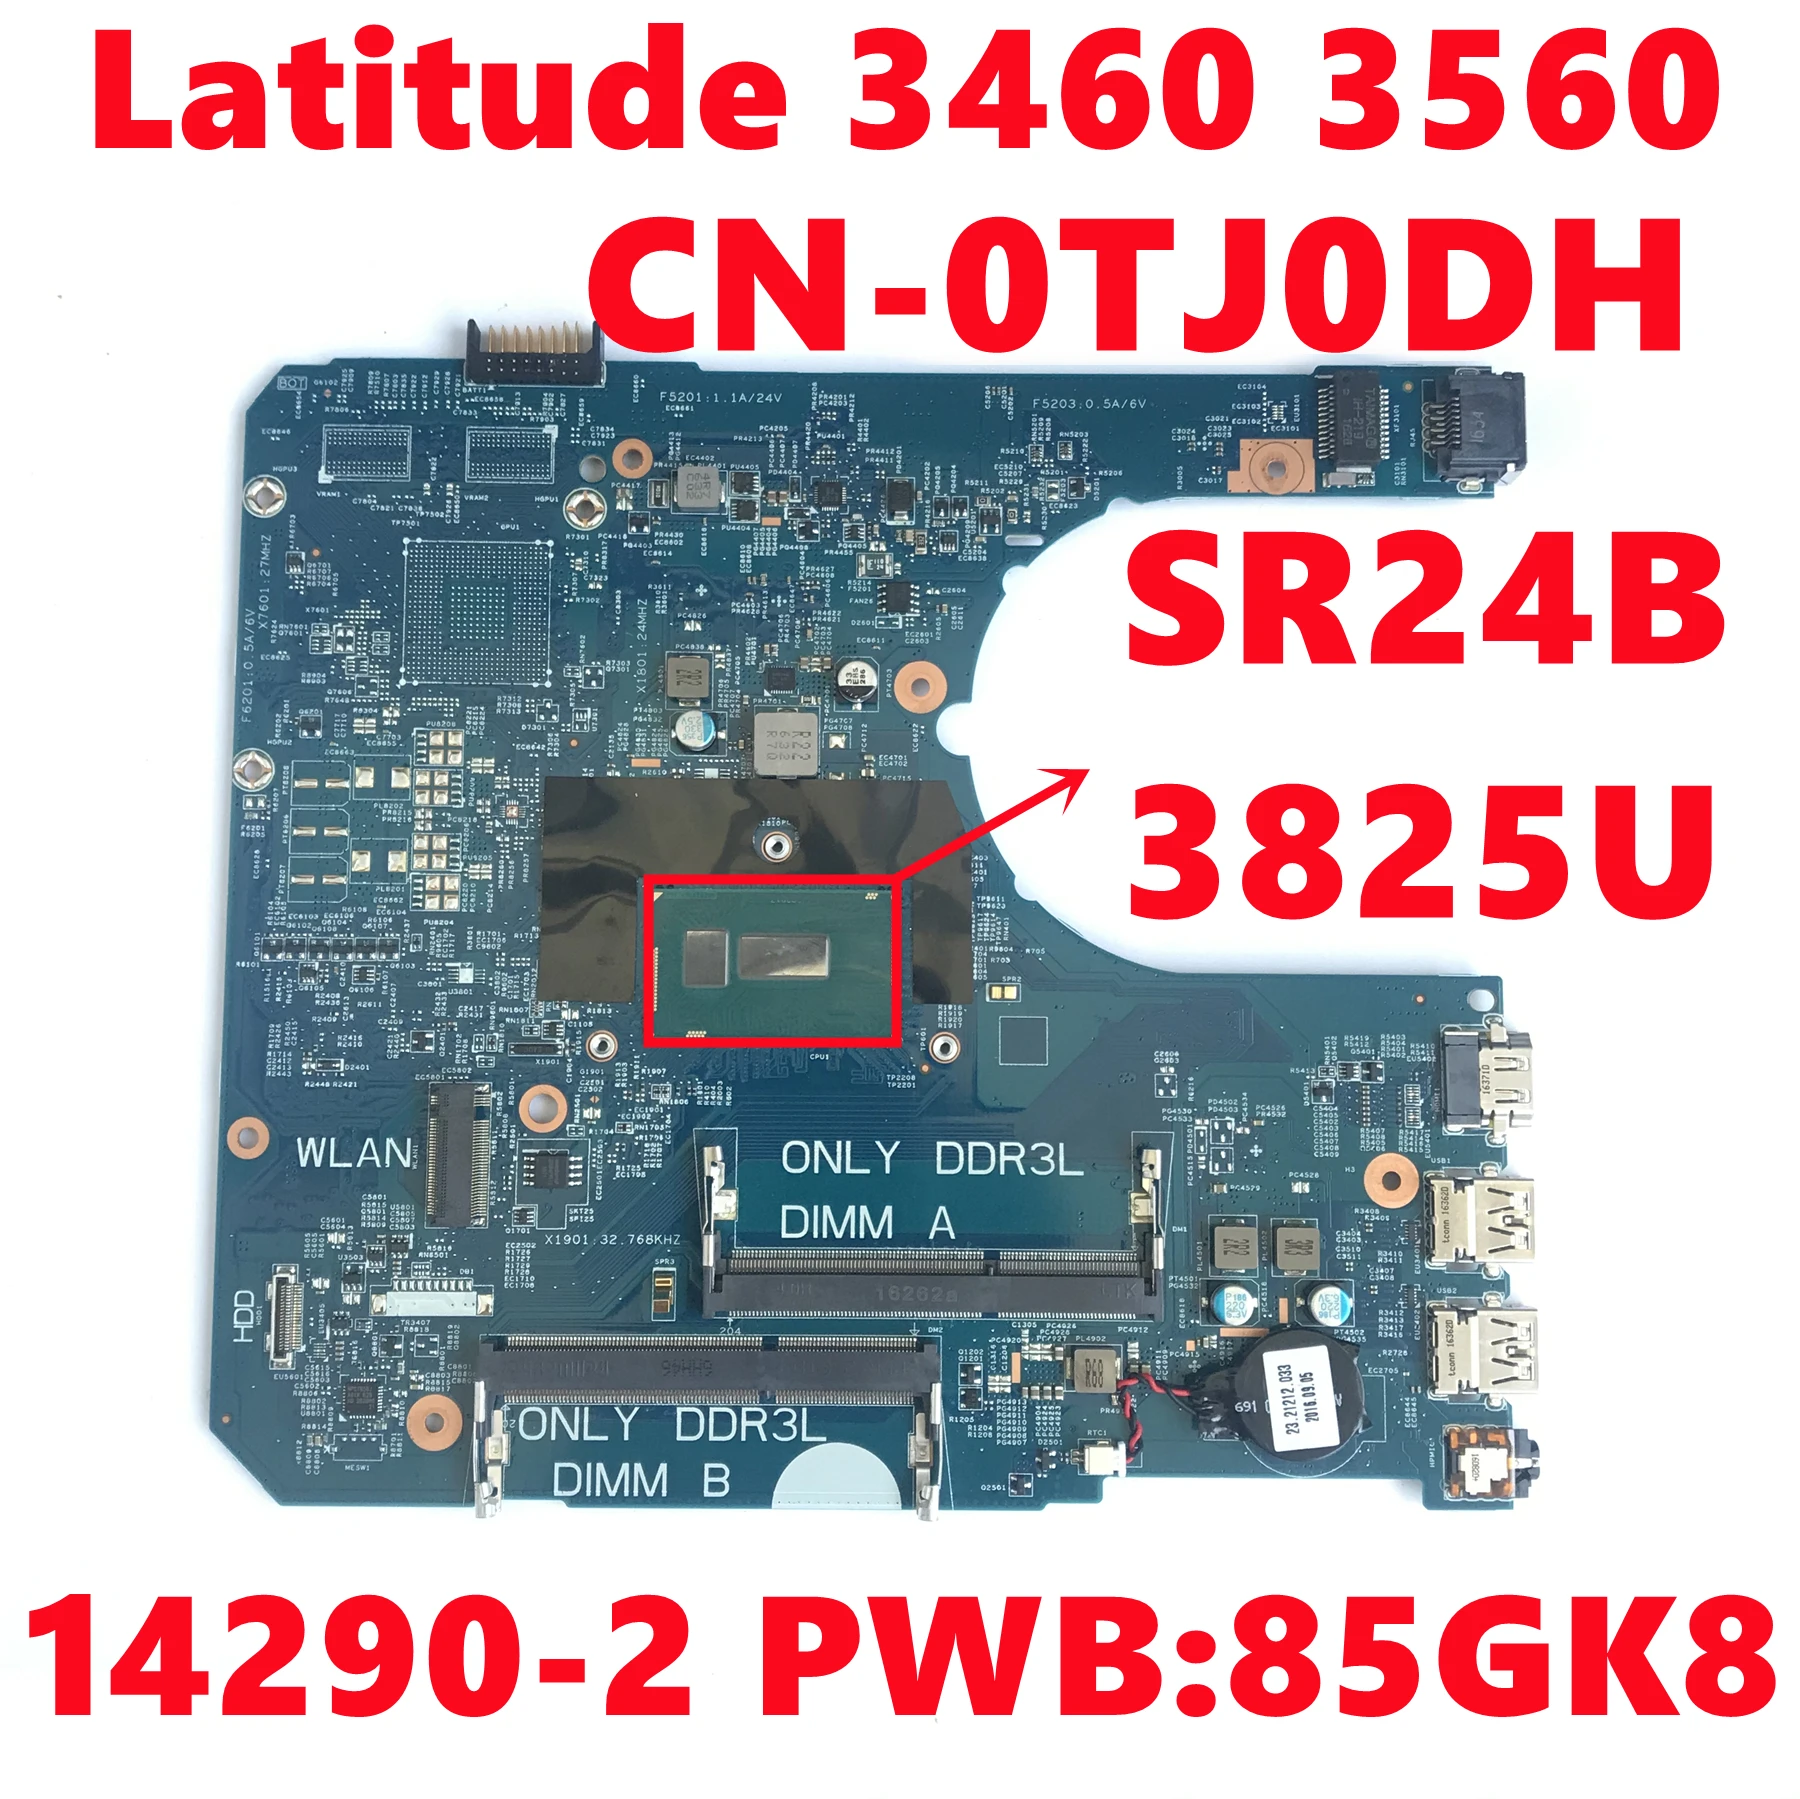 

CN-0TJ0DH 0TJ0DH TJ0DH For Dell Latitude 3460 3560 Laptop Motherboard 14290-2 PWB:85GK8 With SR24B 3825U CPU 100% Fully Tested